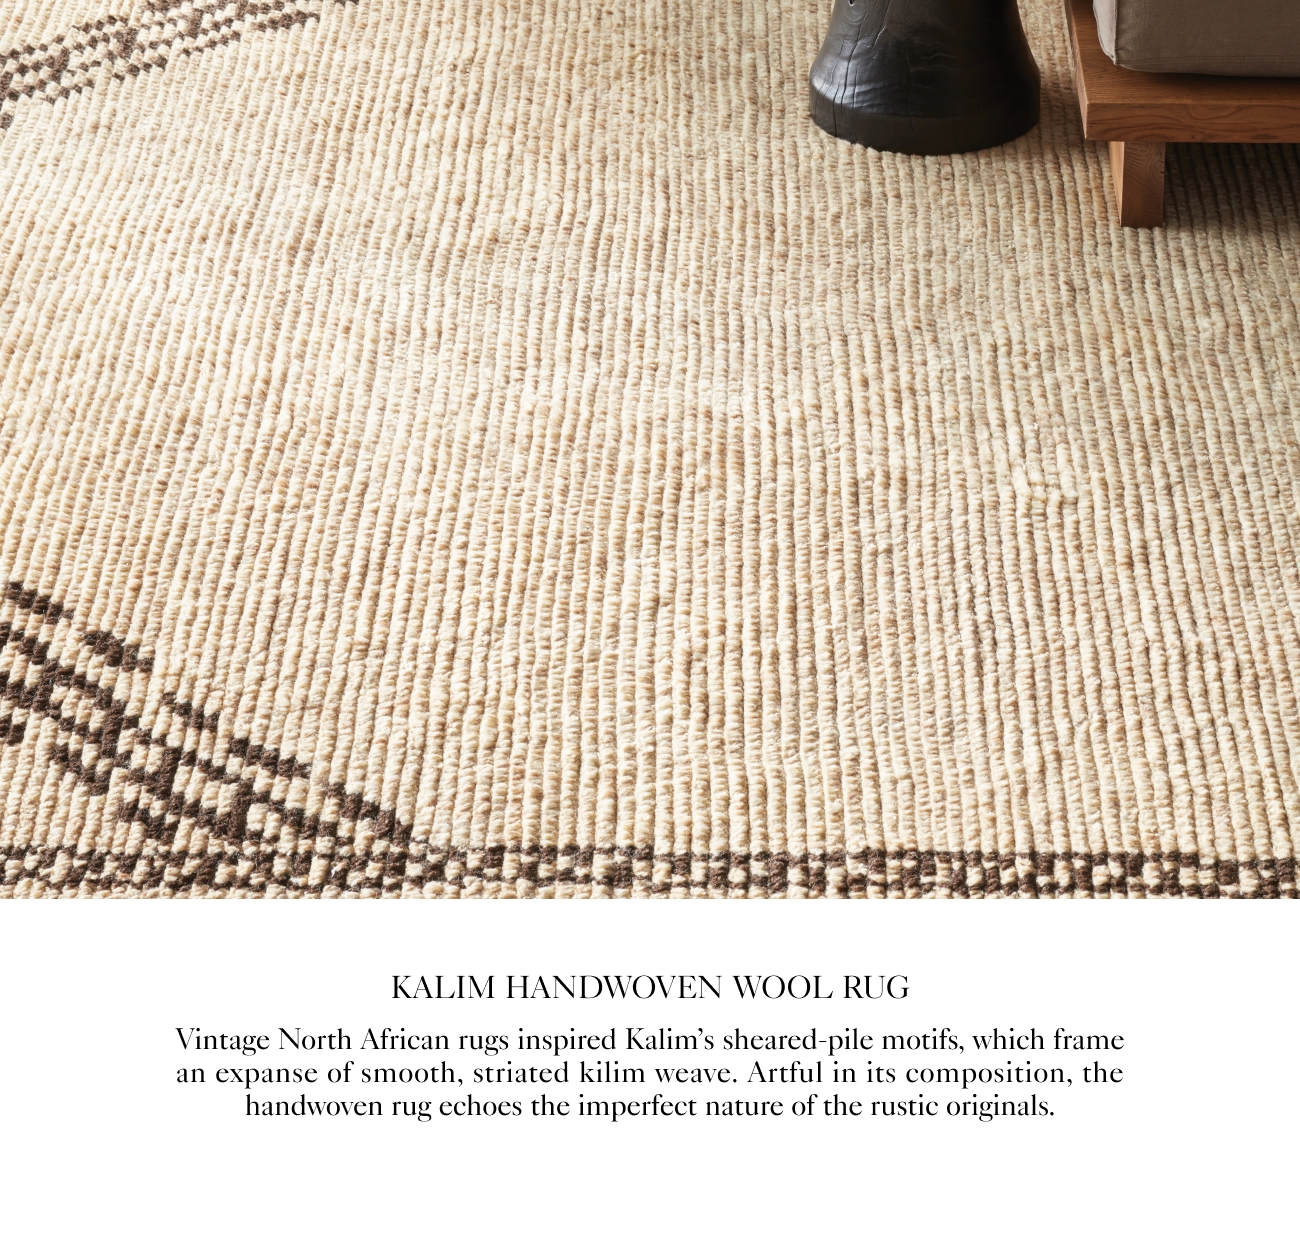  3 'EN WOOL RUC KALIM HANDWOV the pile motifs, which frame ms sheared striated kilim weave. Artful in its composition 5 ge North African rugs inspired Kali an expanse of smooth Vinta handwoven rug echoes the imperfect nature of the rustic originals. 